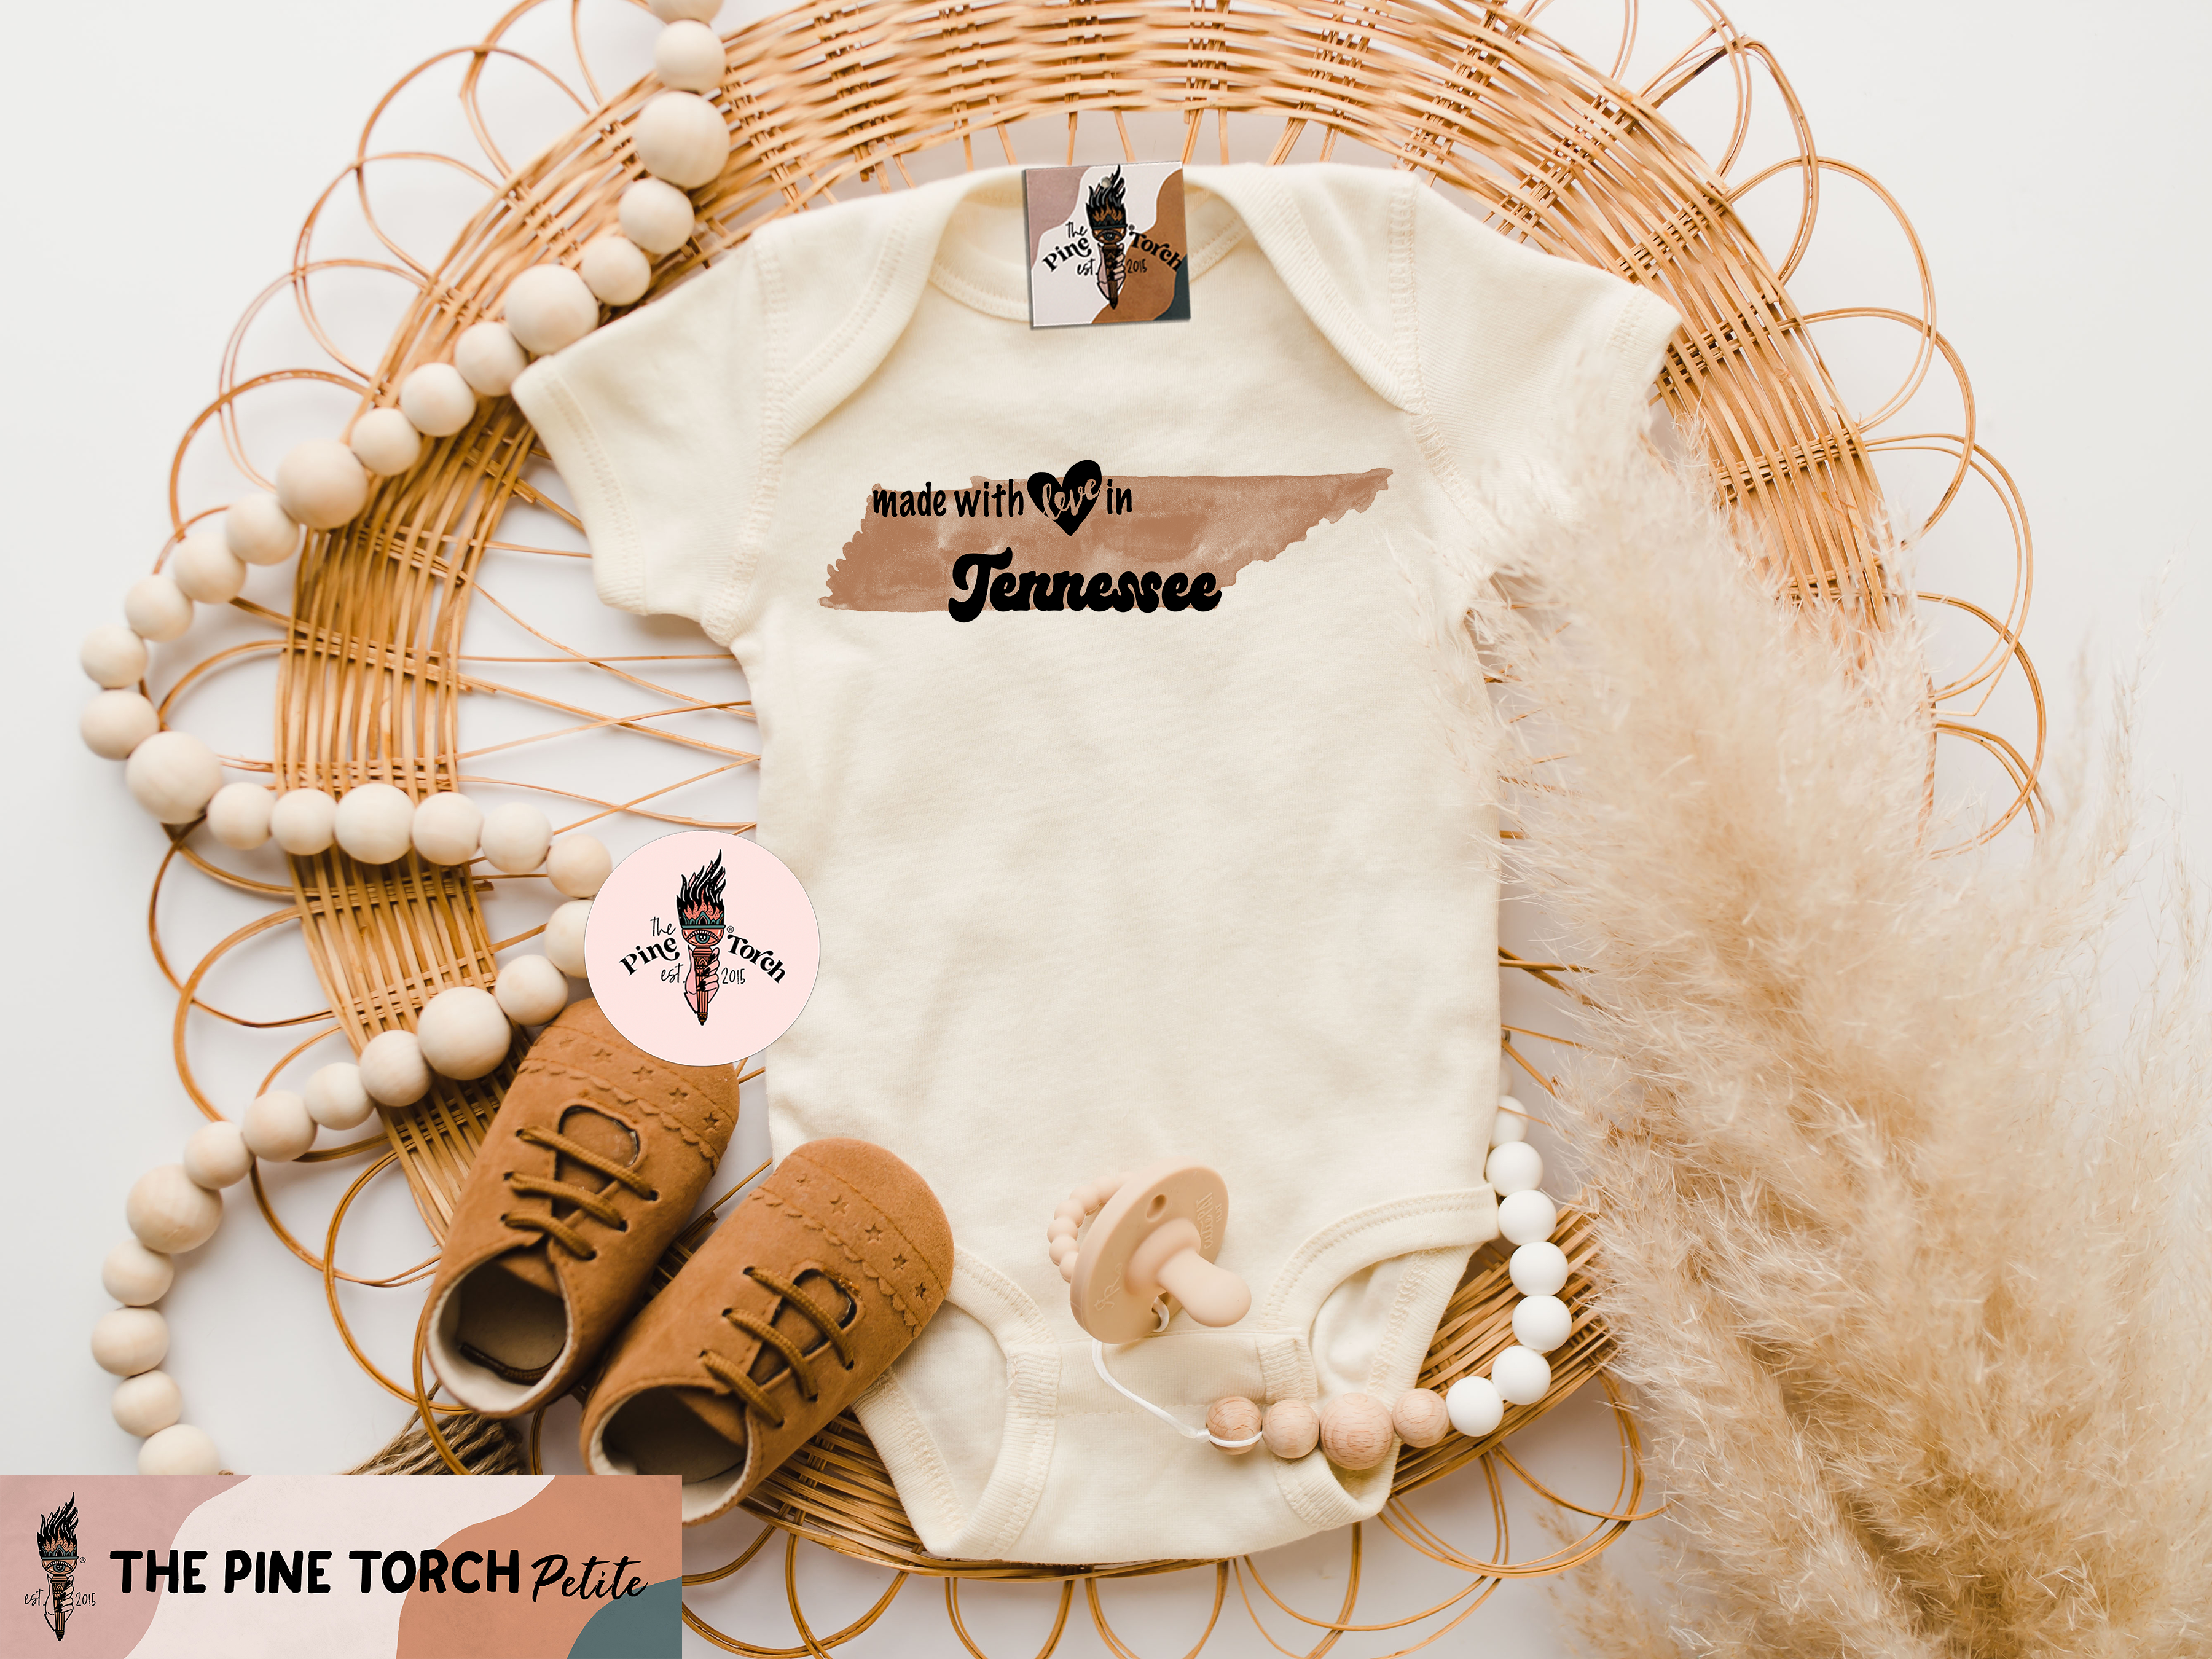 « MADE WITH LOVE IN TENNESSEE » BODYSUIT